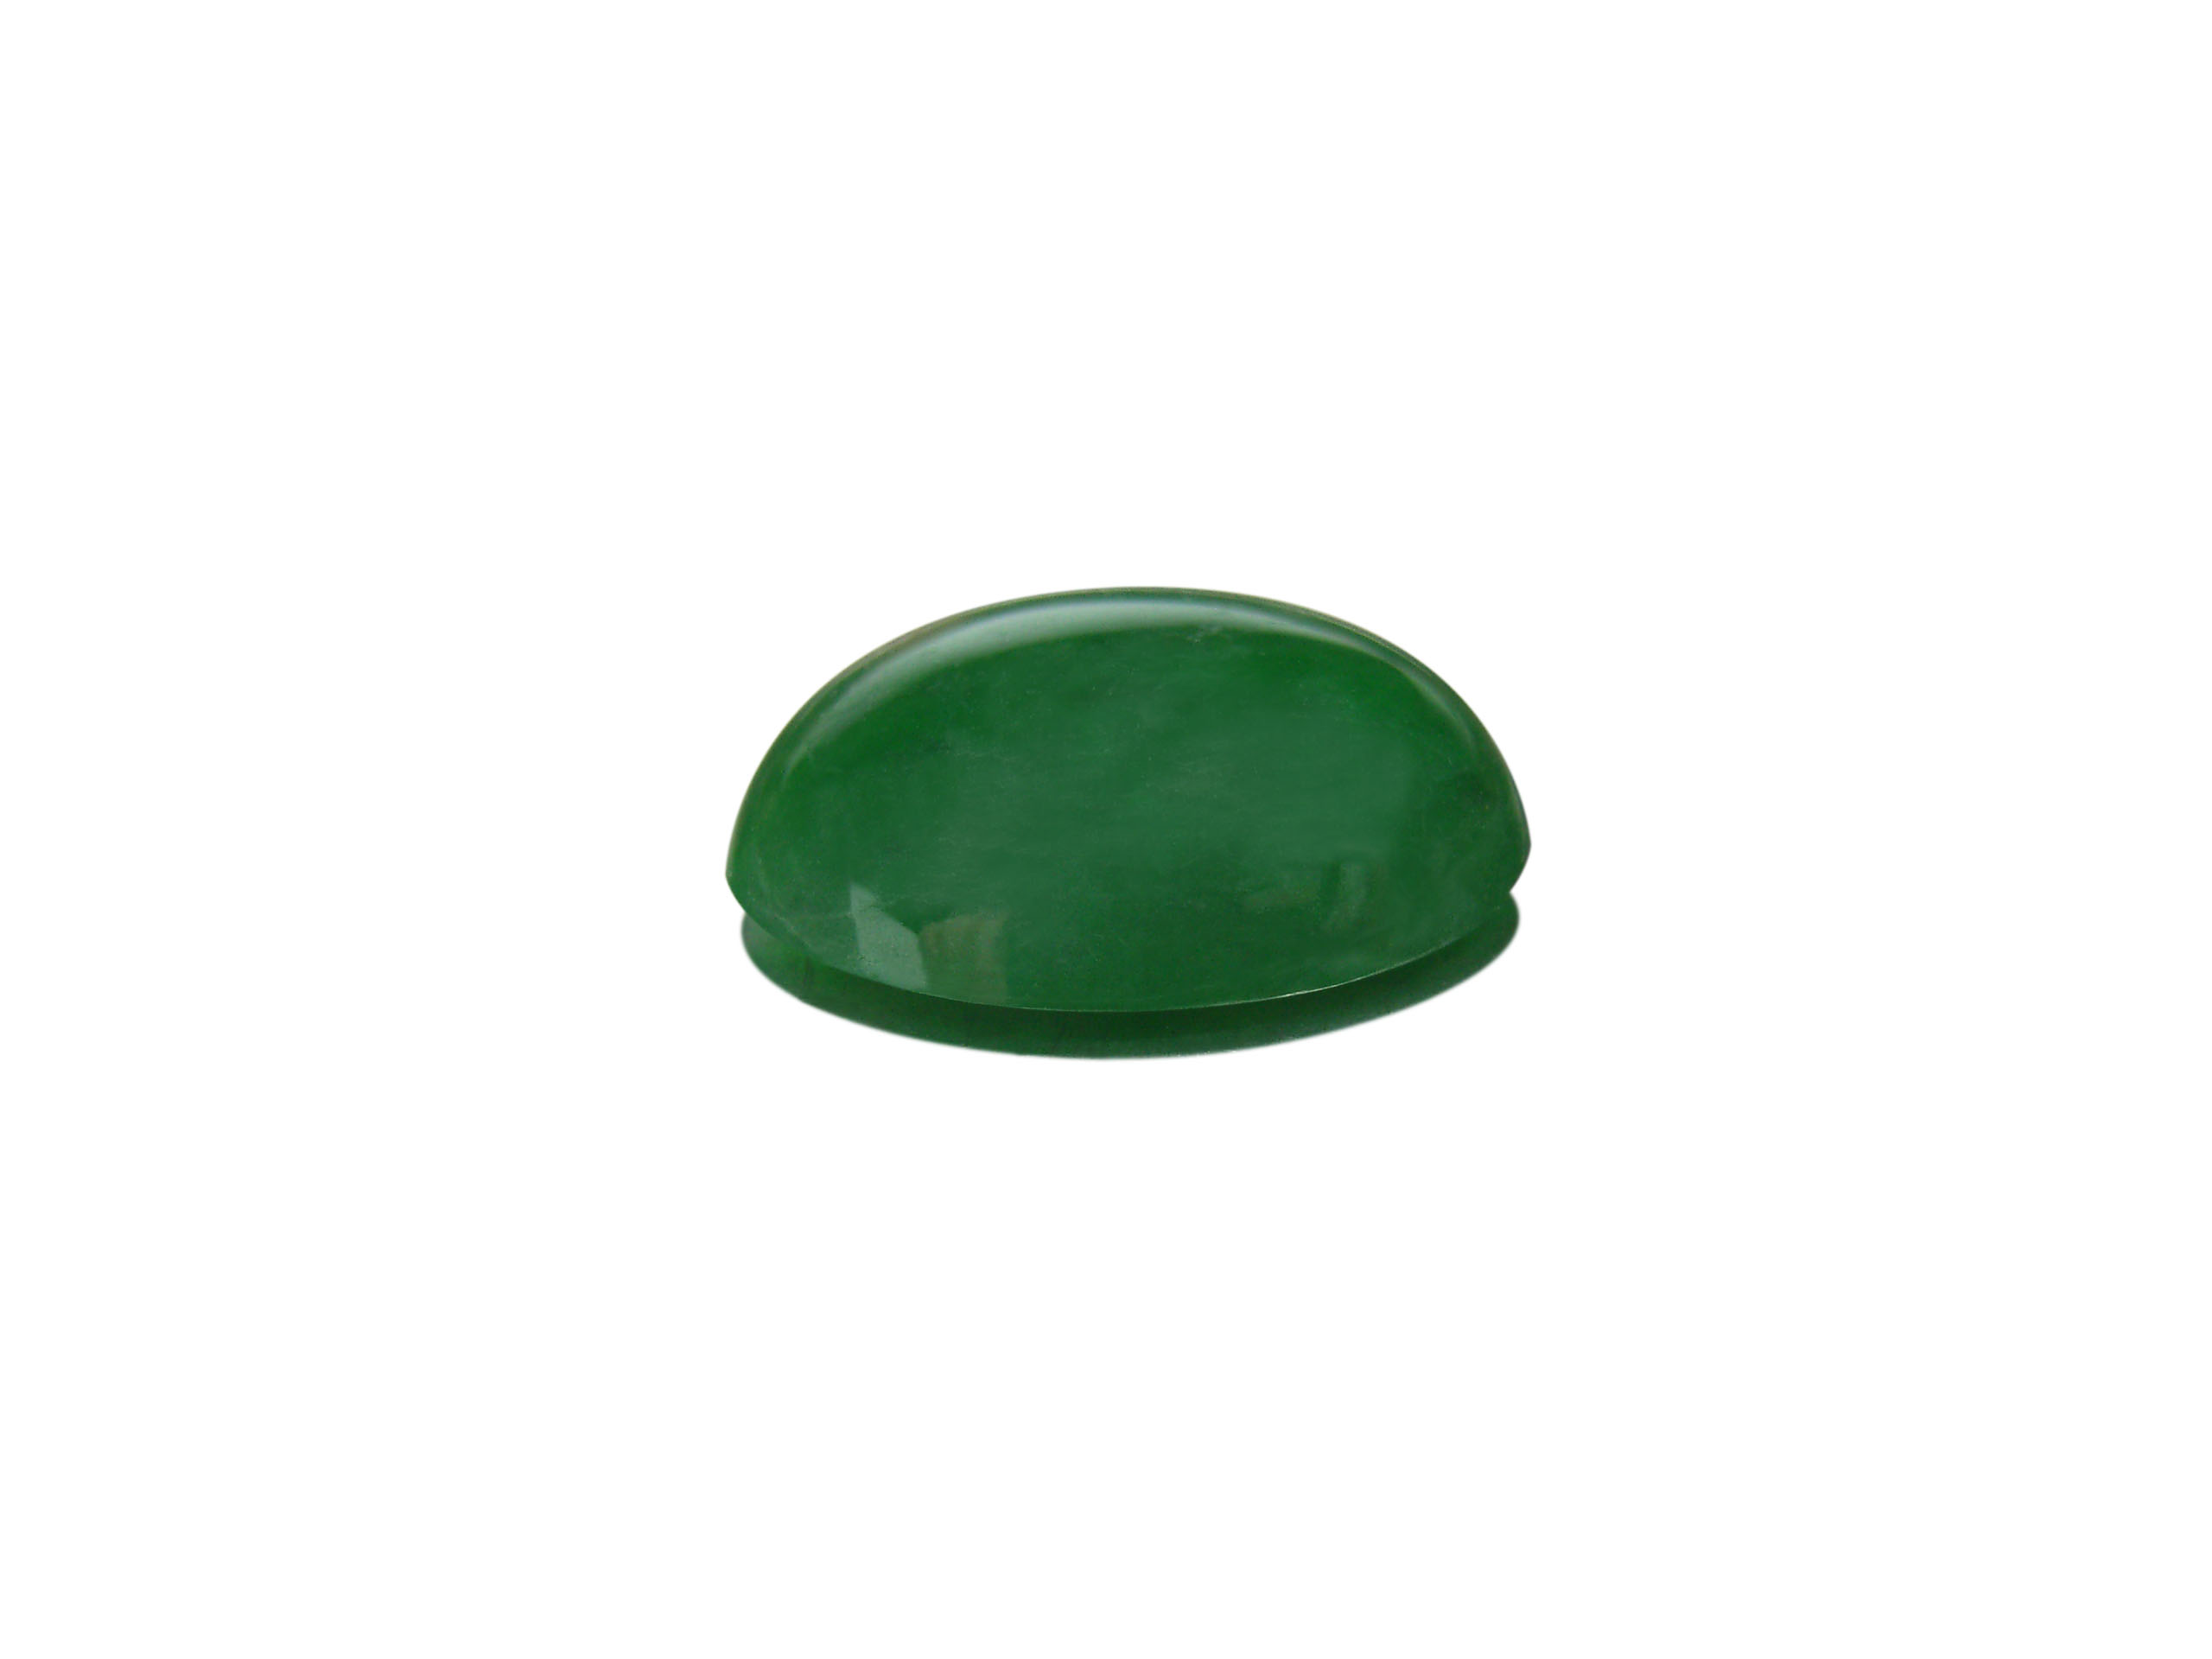 SOLD Apple green A-Type Jadeite,BETTER IN REAL LIFE than picture